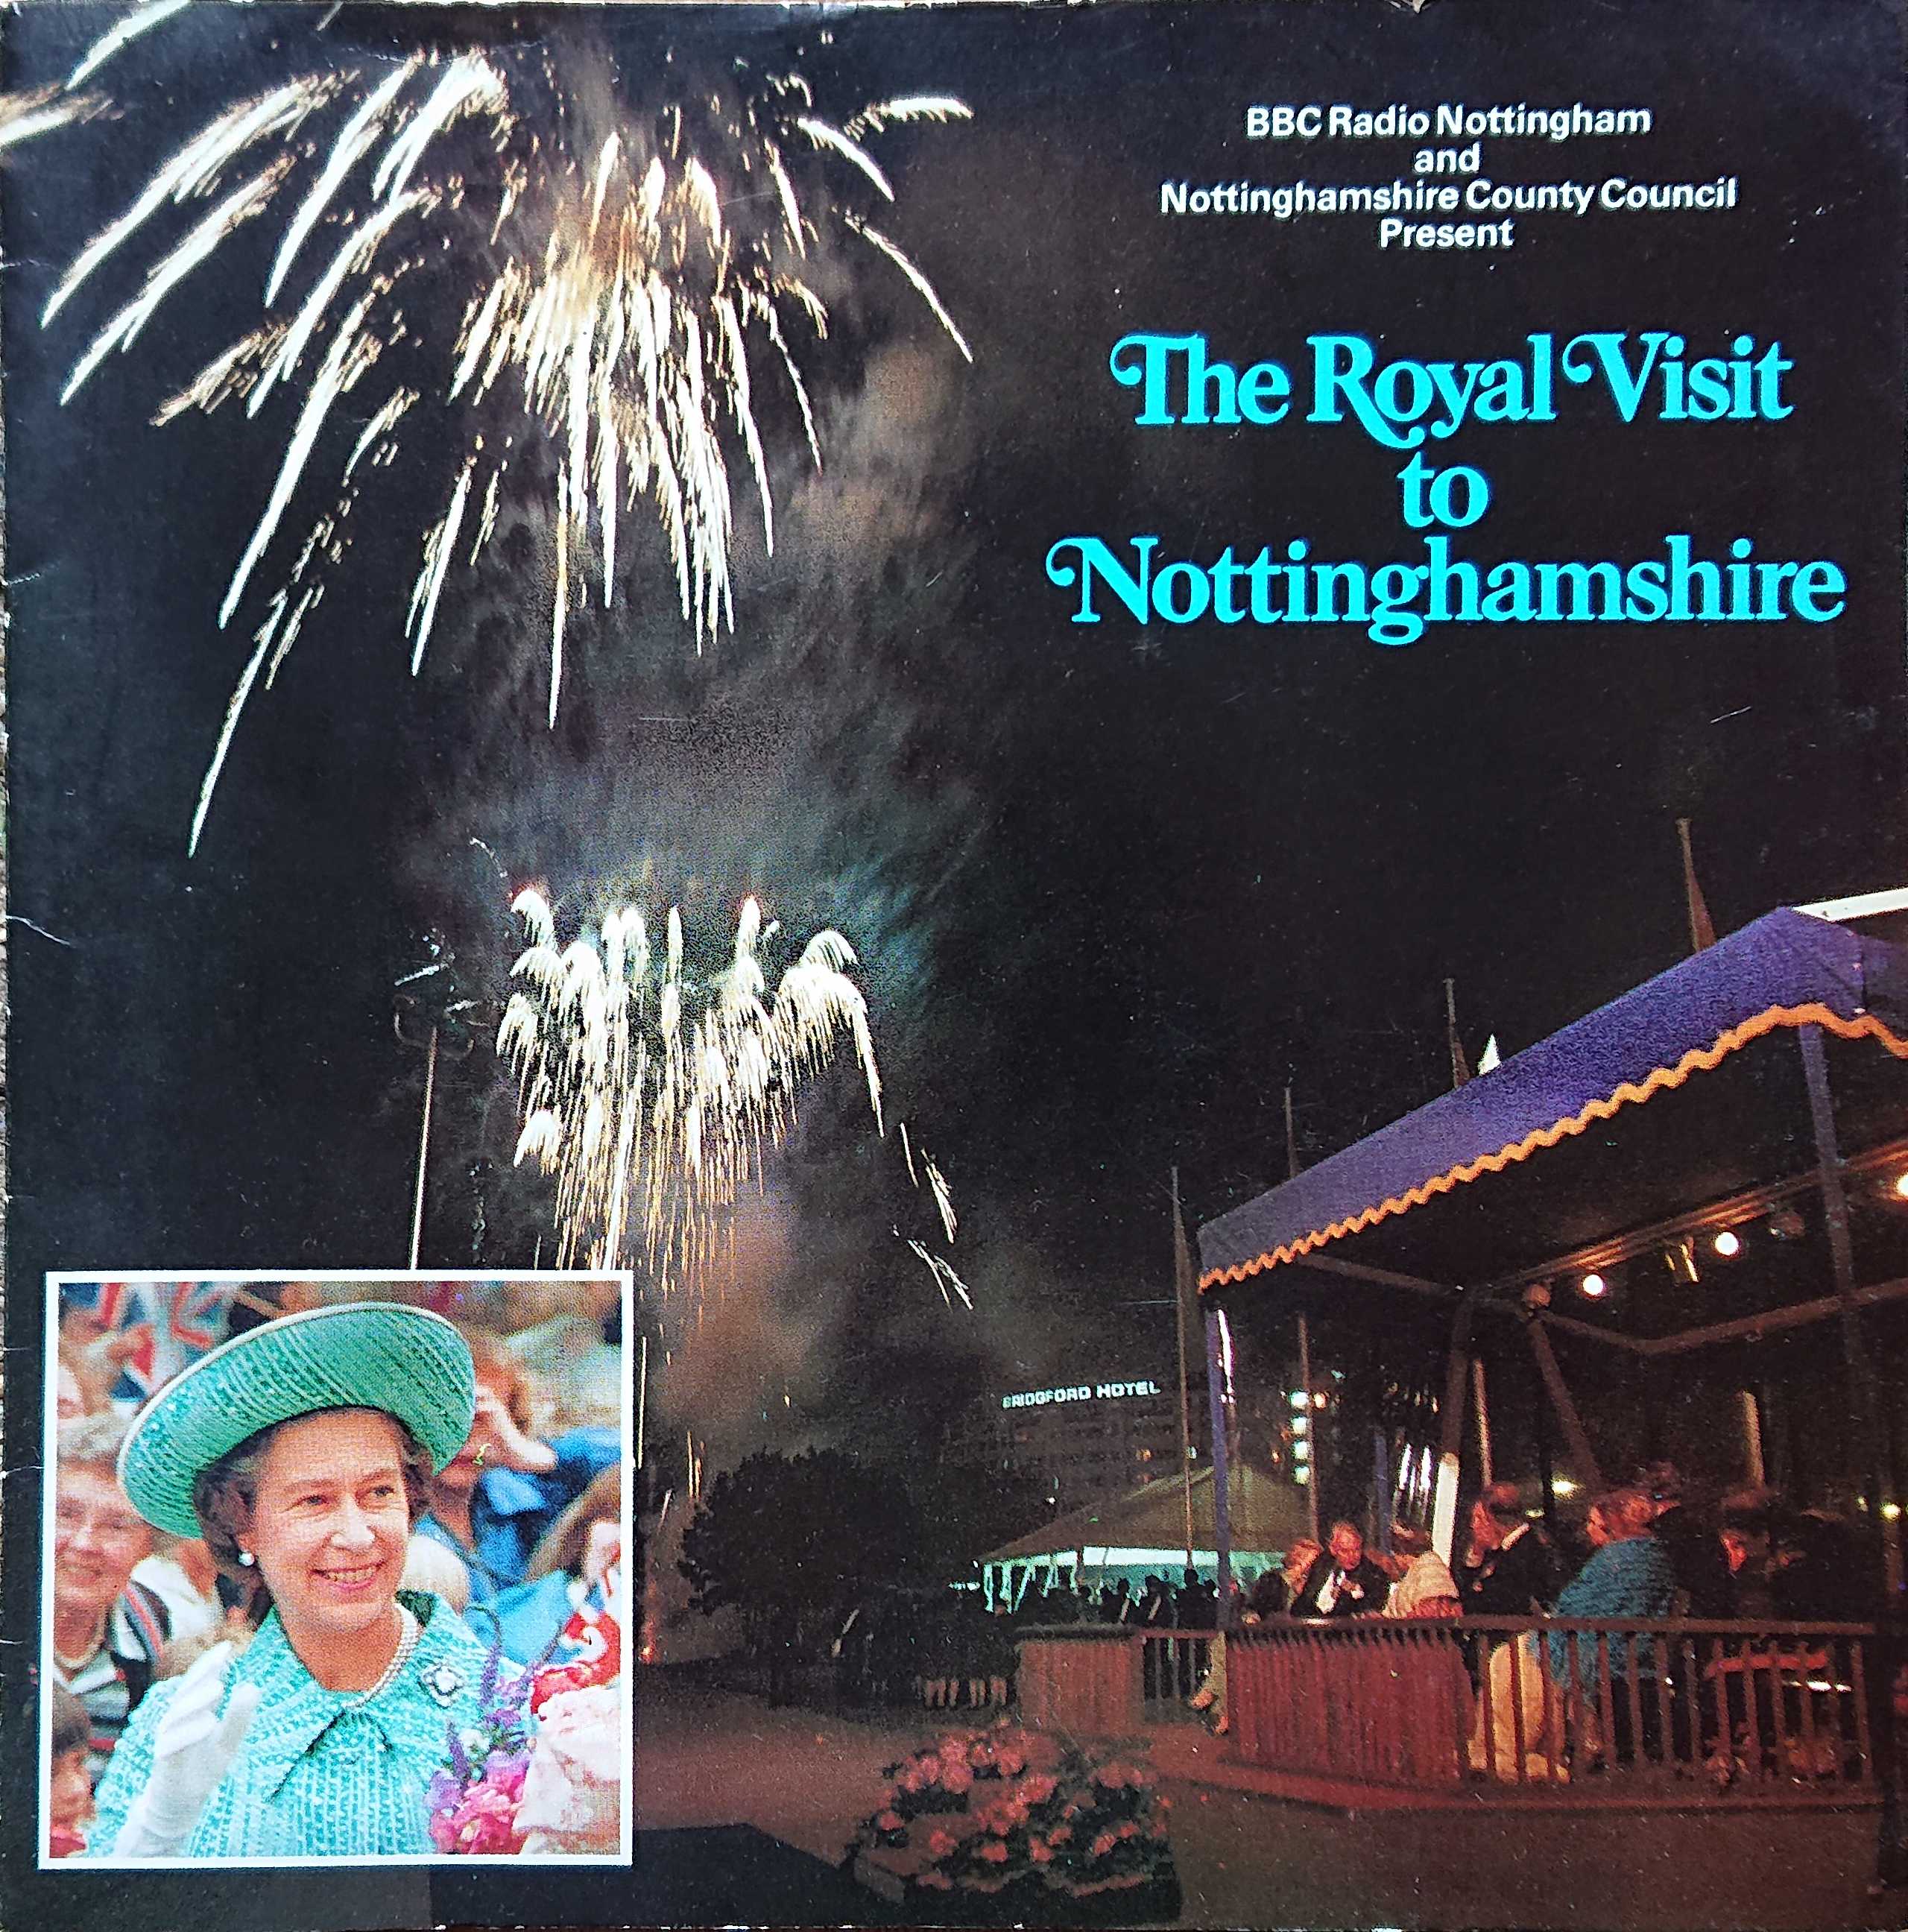 Picture of The Royal visit to Nottinghamshire by artist Dennis McCarthy / John Lilley / Alastair McDougall / Sandi Marshall from the BBC singles - Records and Tapes library